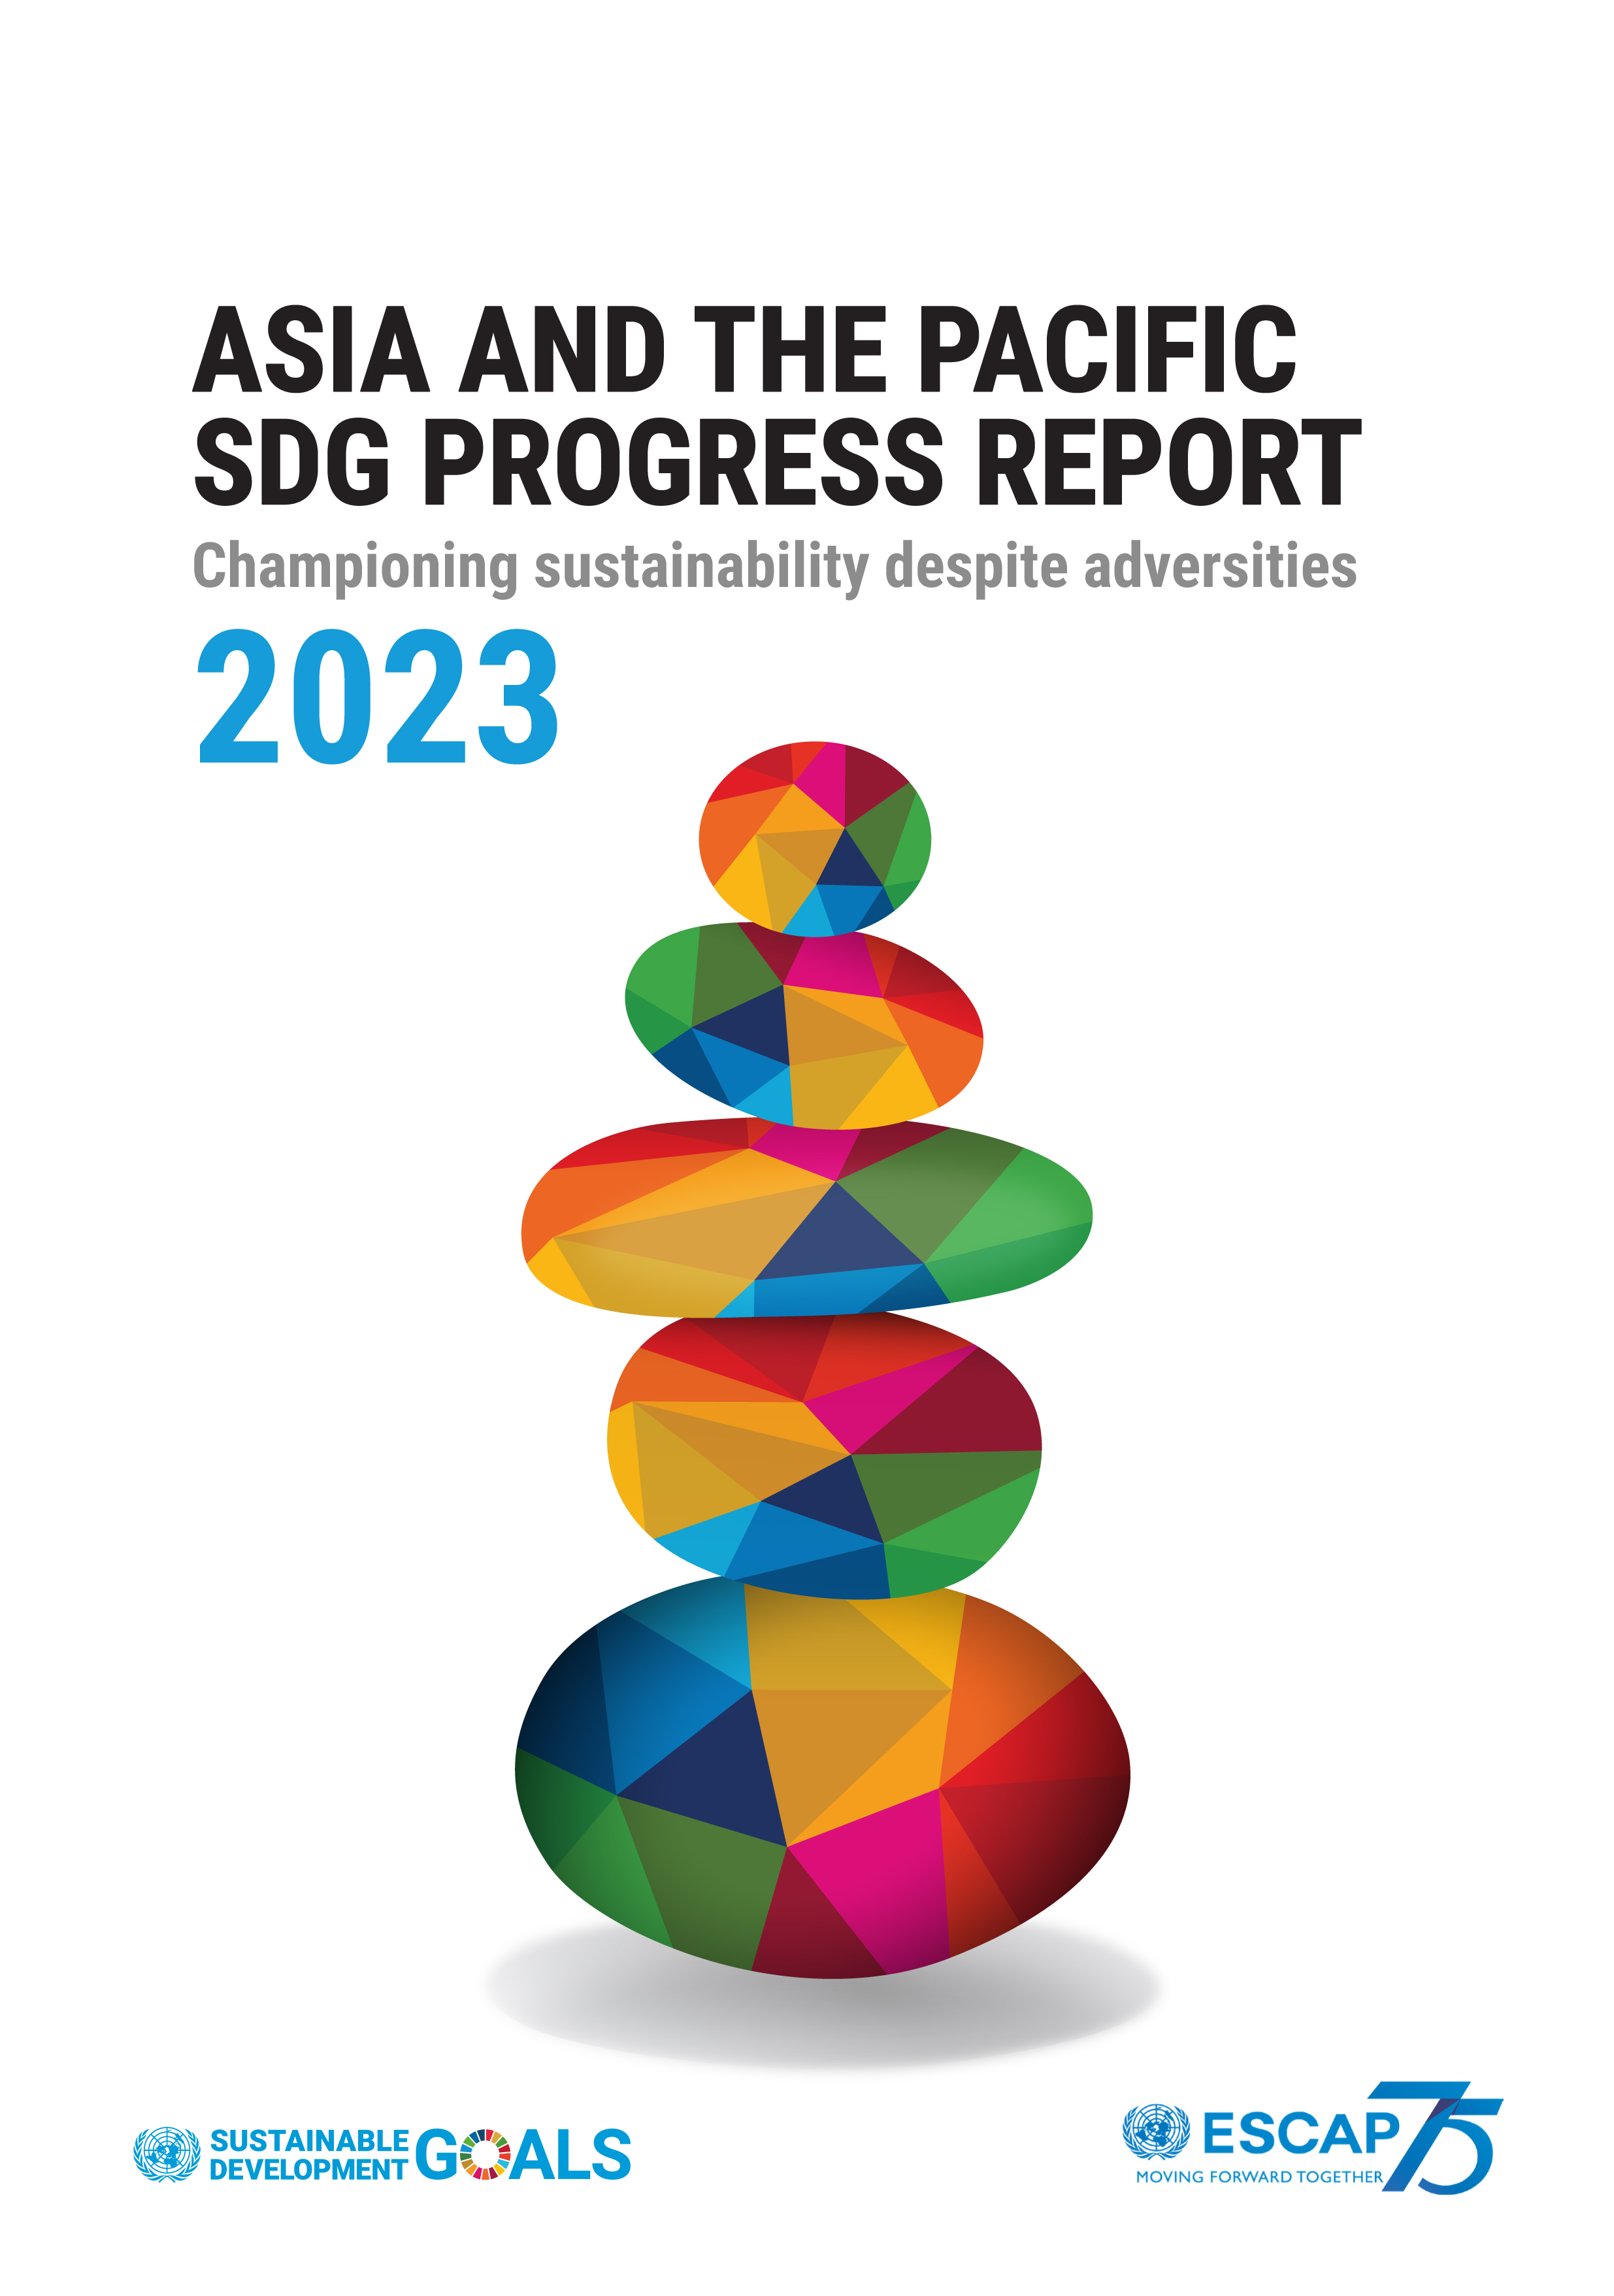 image of Asia and the Pacific SDG Progress Report 2023